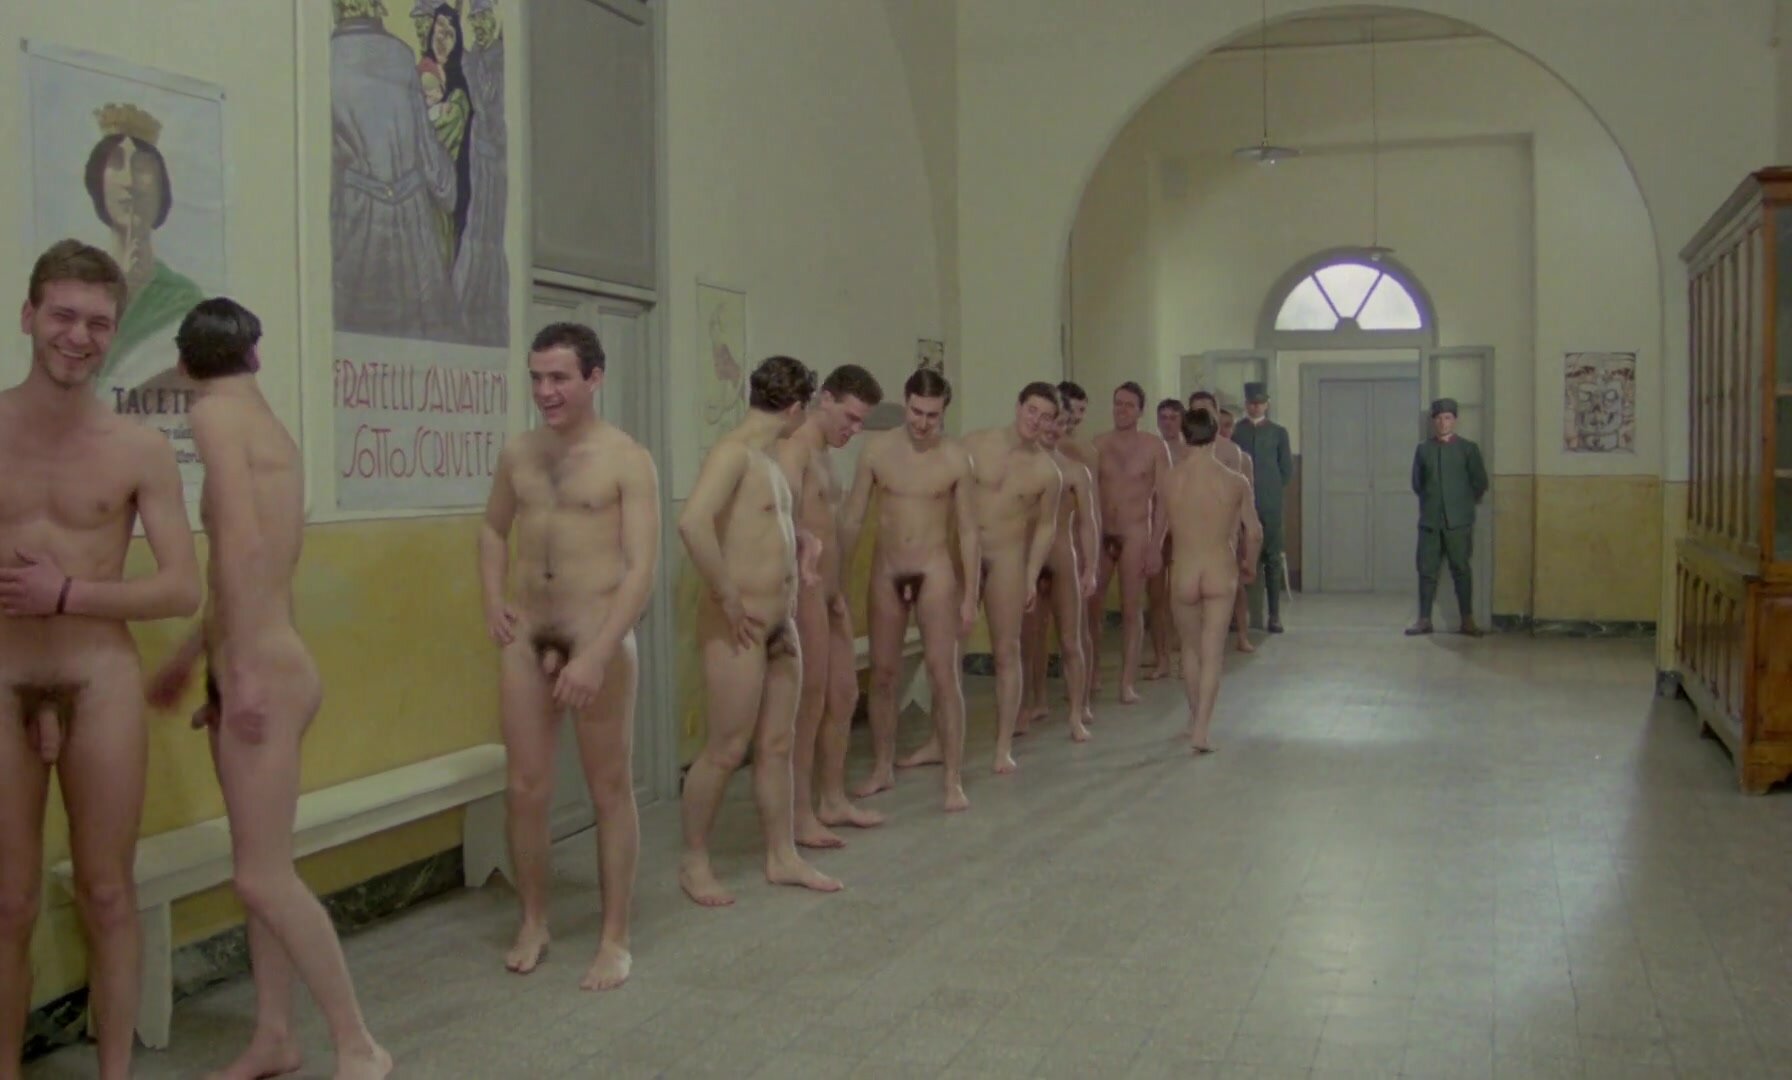 Lot of extras naked in P0rca V@cca